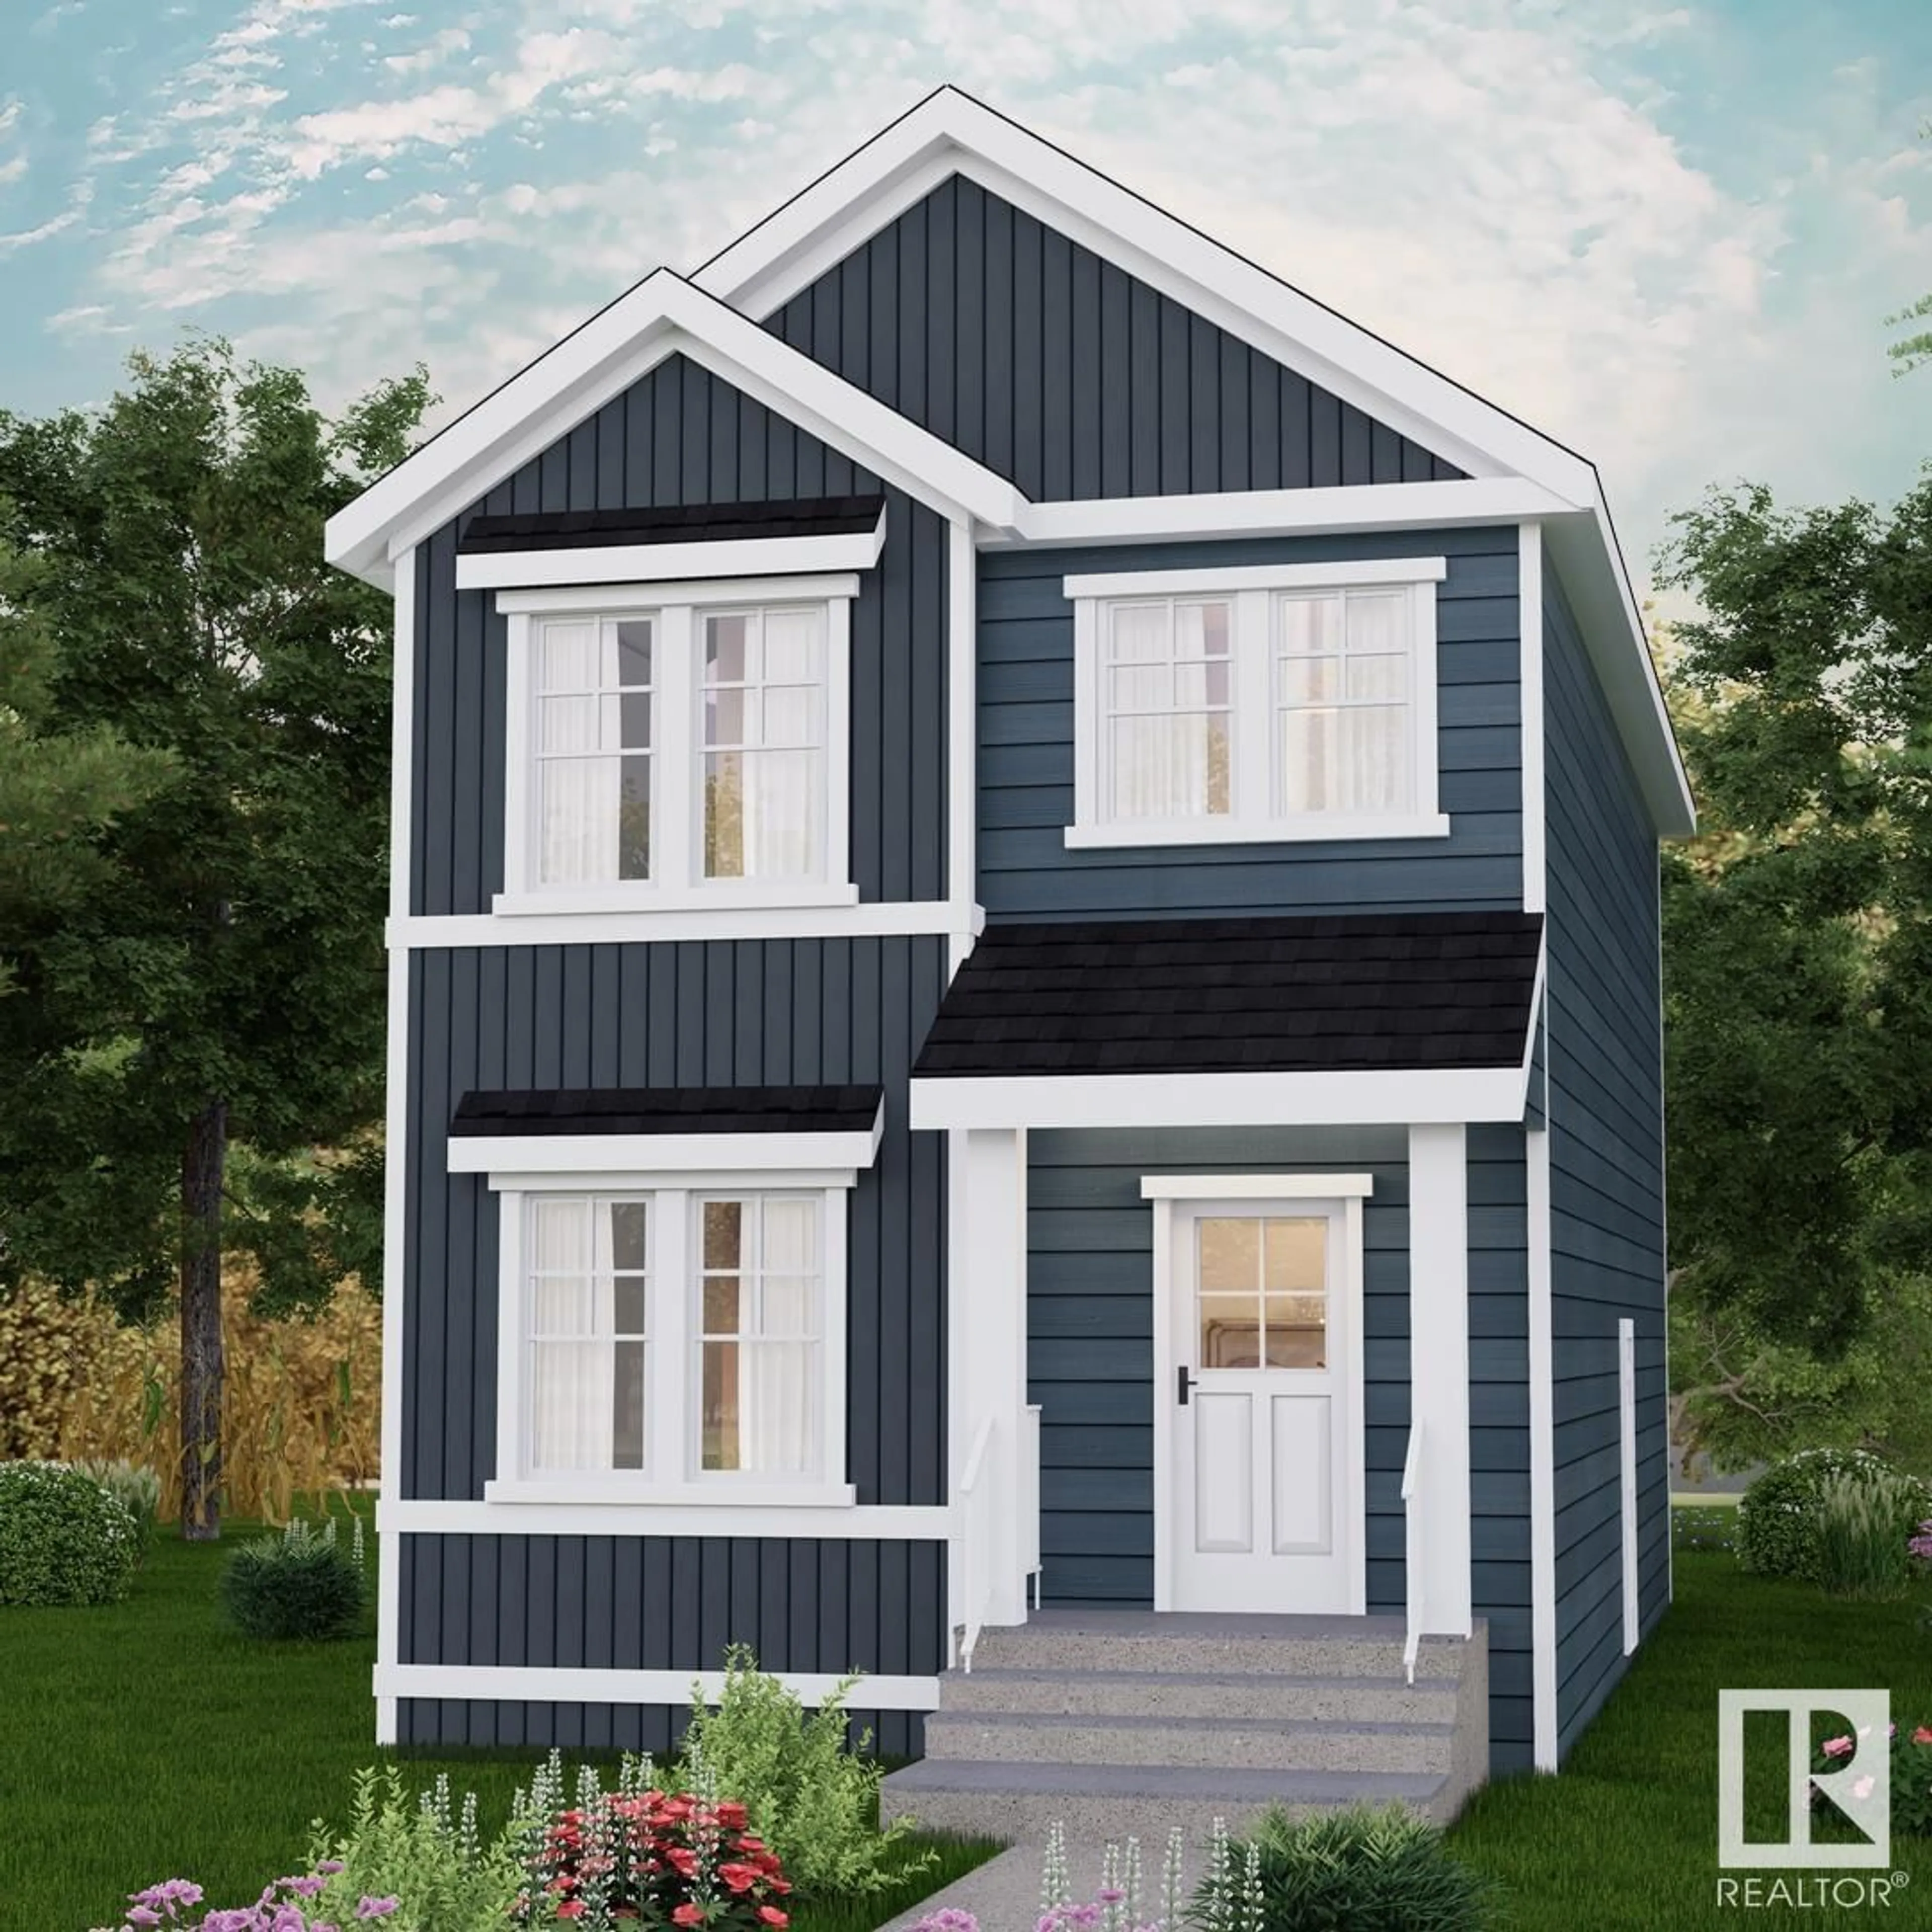 Home with vinyl exterior material for 9396 221 ST NW, Edmonton Alberta T5T4A8